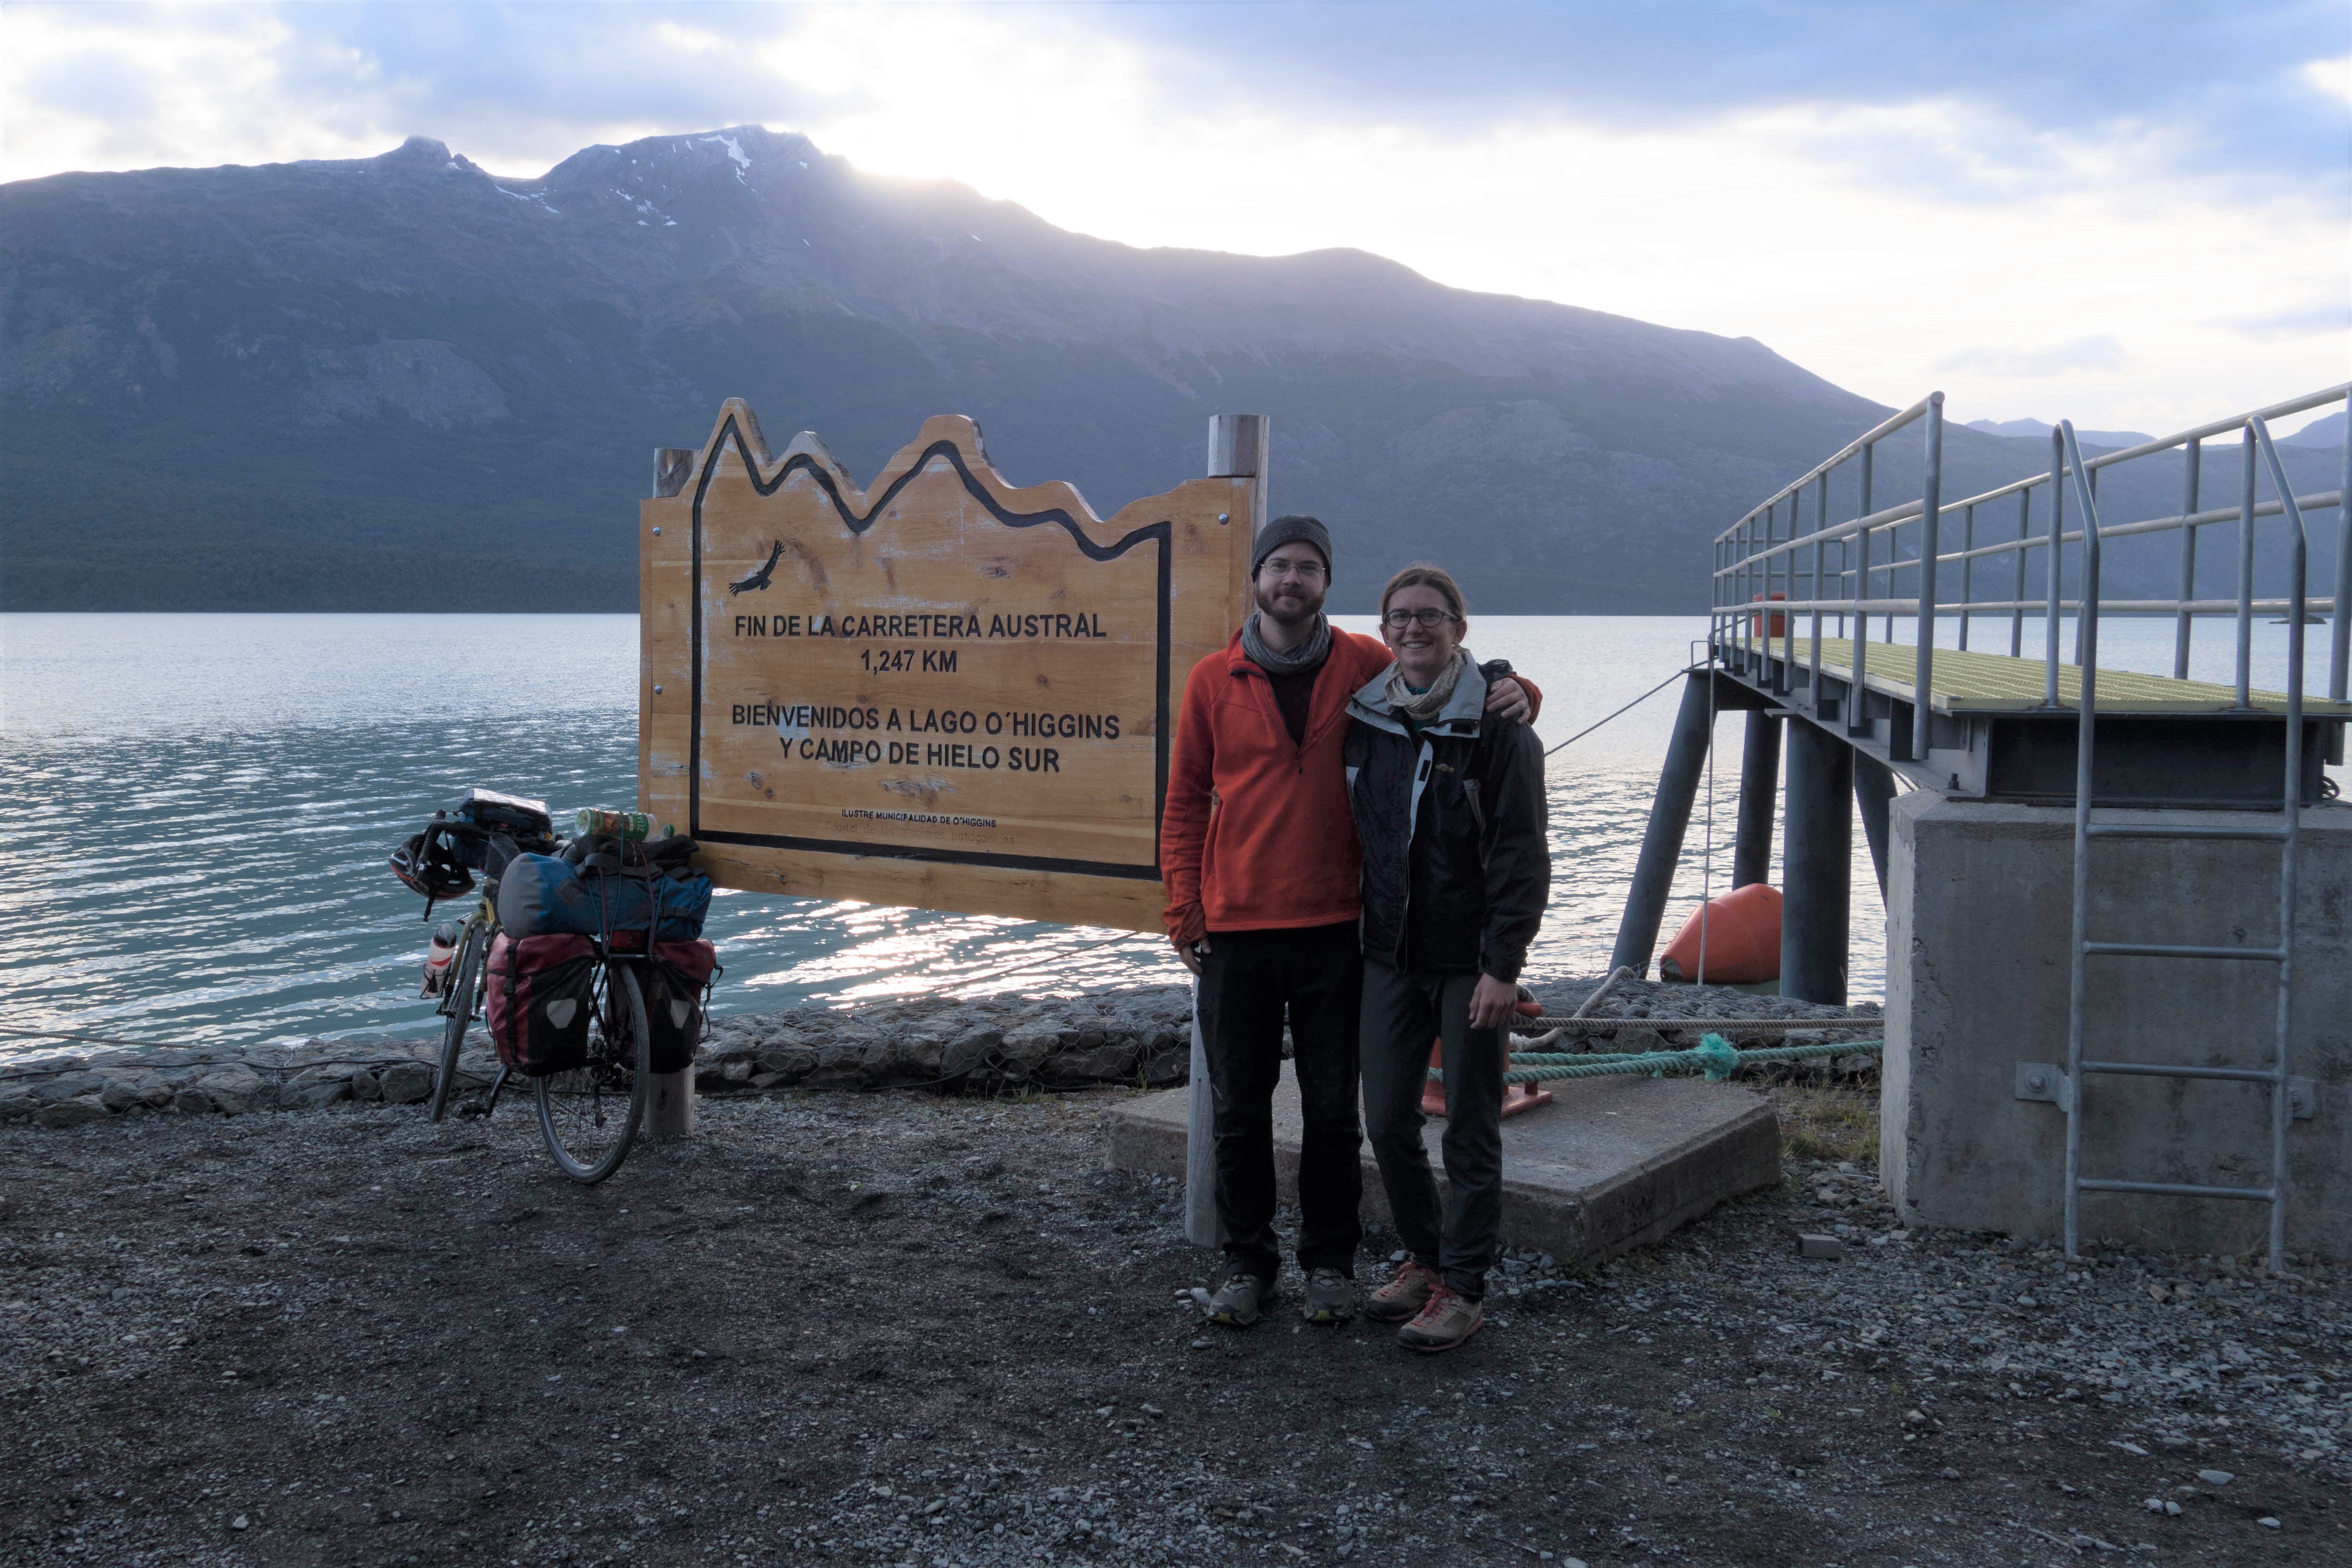 end of the carretera austral